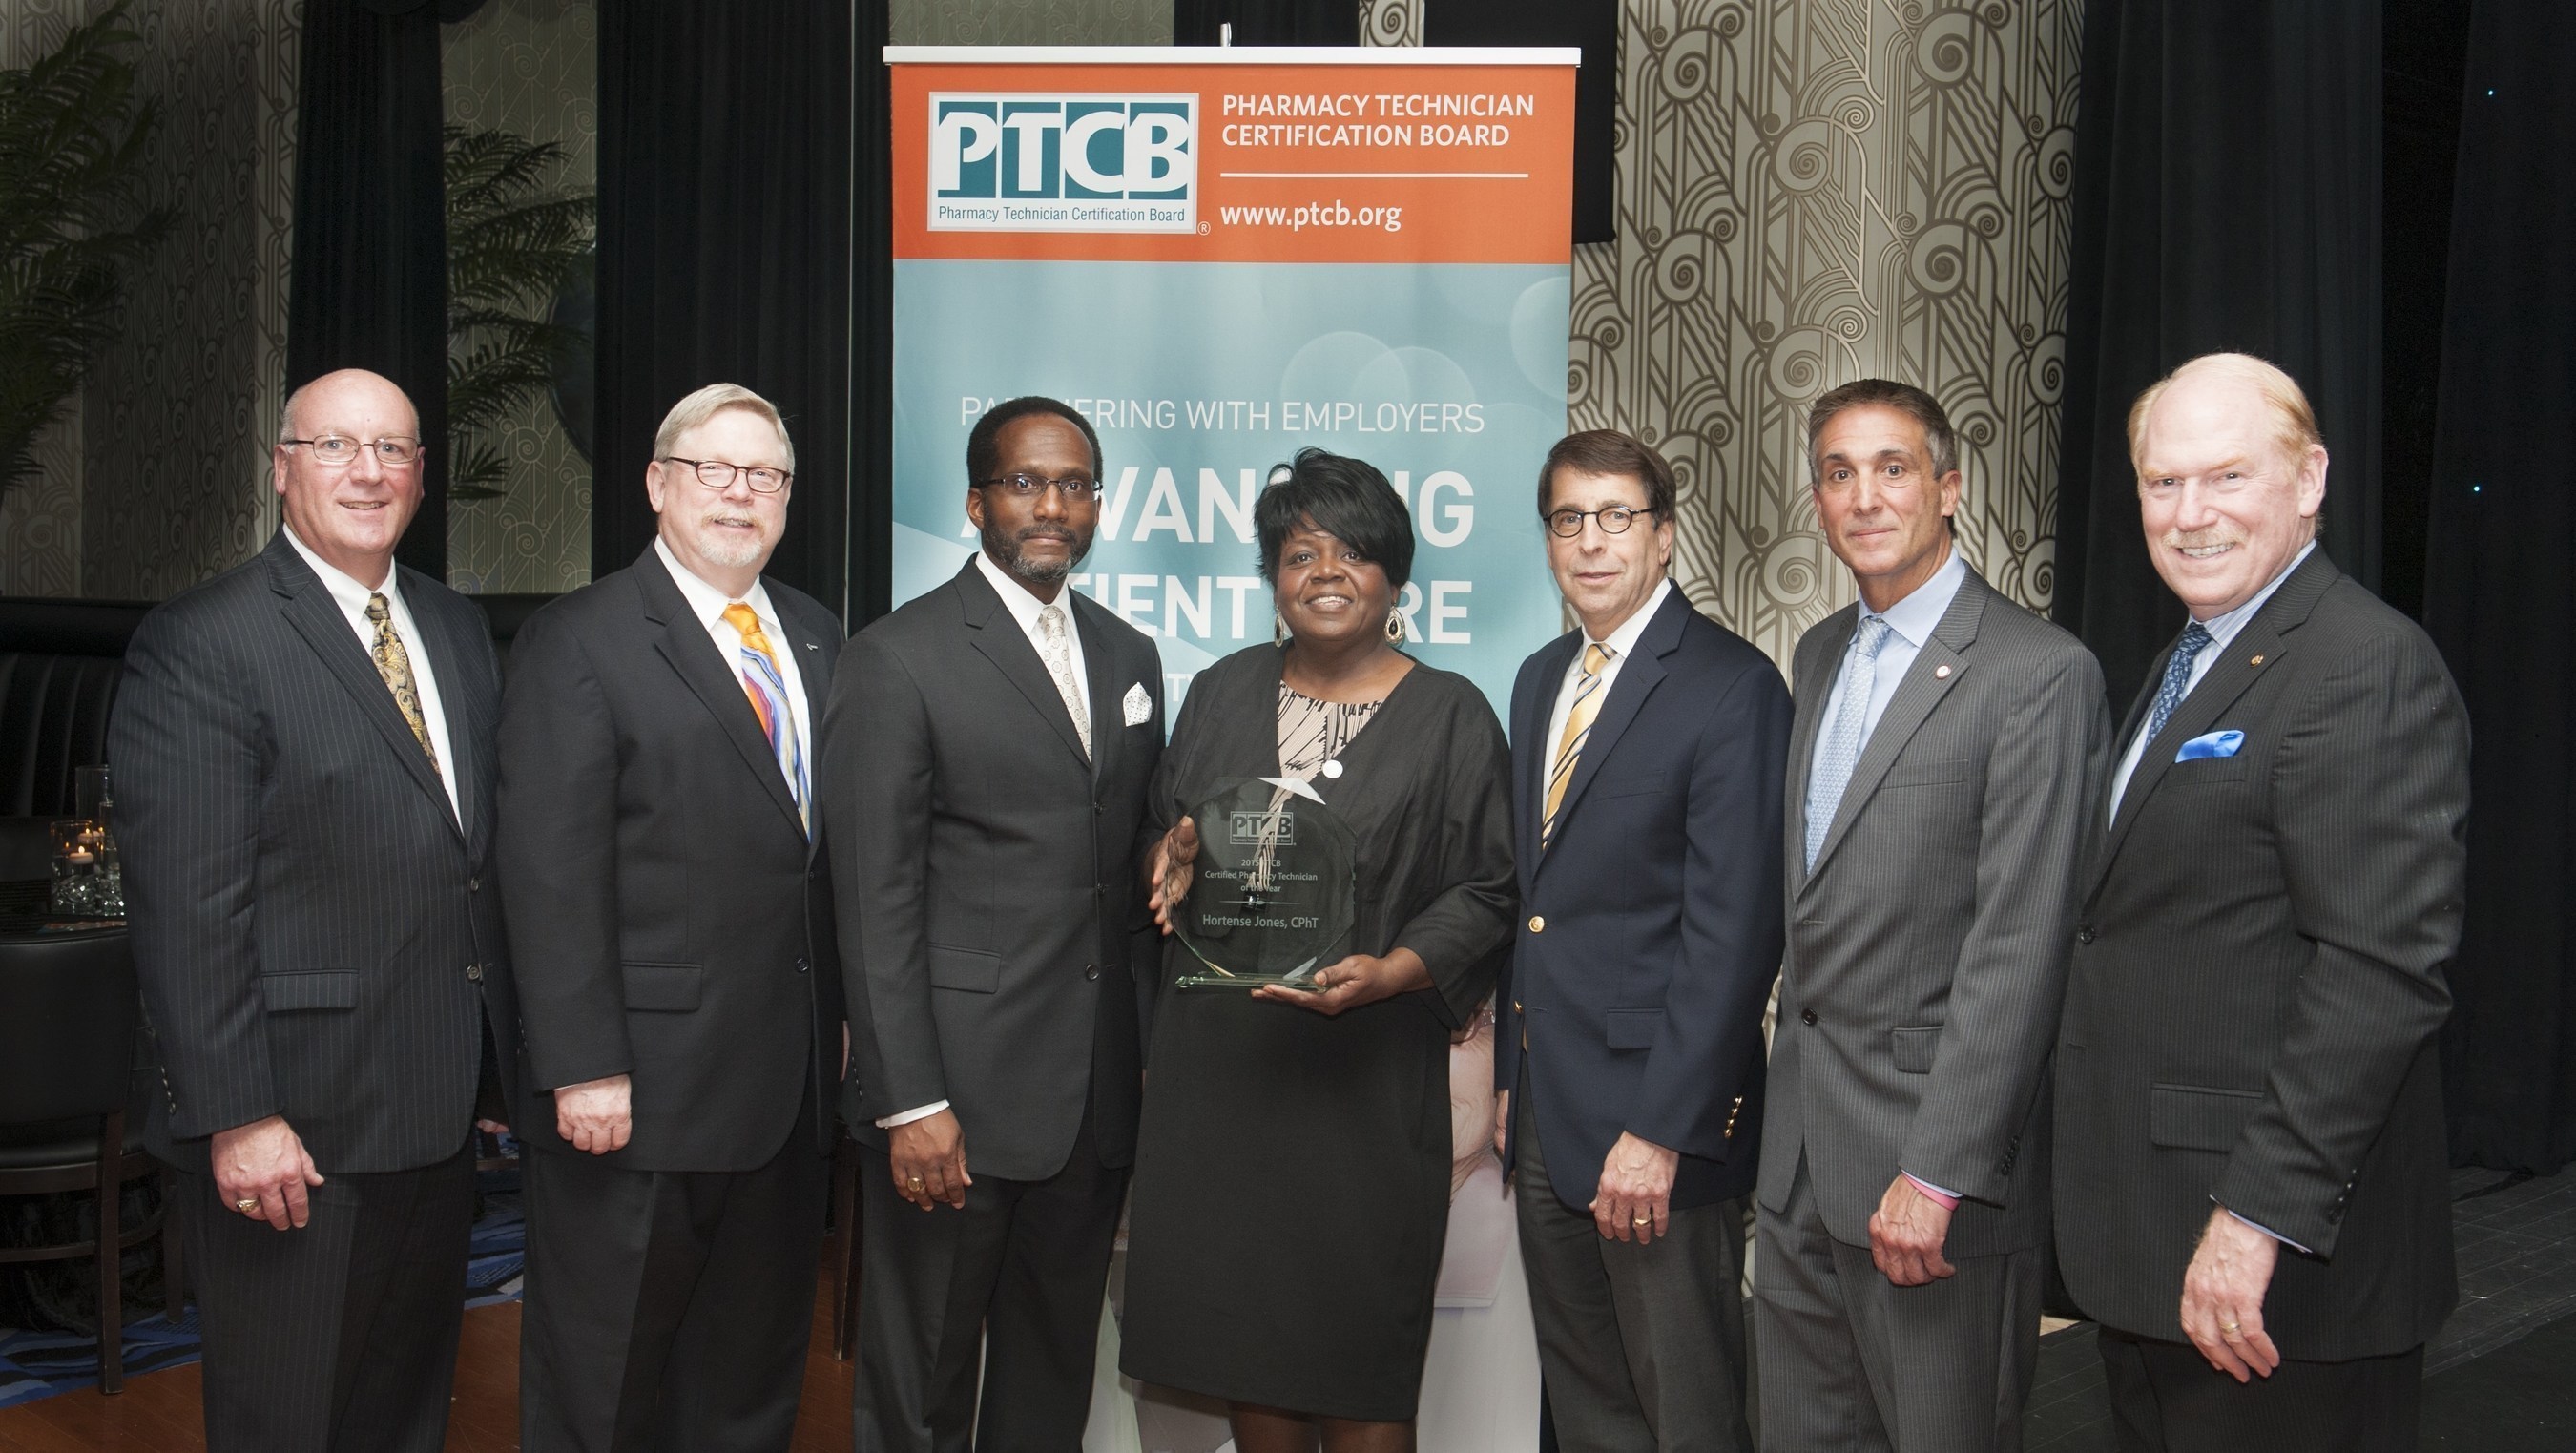 Members of PTCB's Board of Governors recognize 2015 CPhT of the Year Hortense Jones at PTCB's twentieth anniversary celebration.